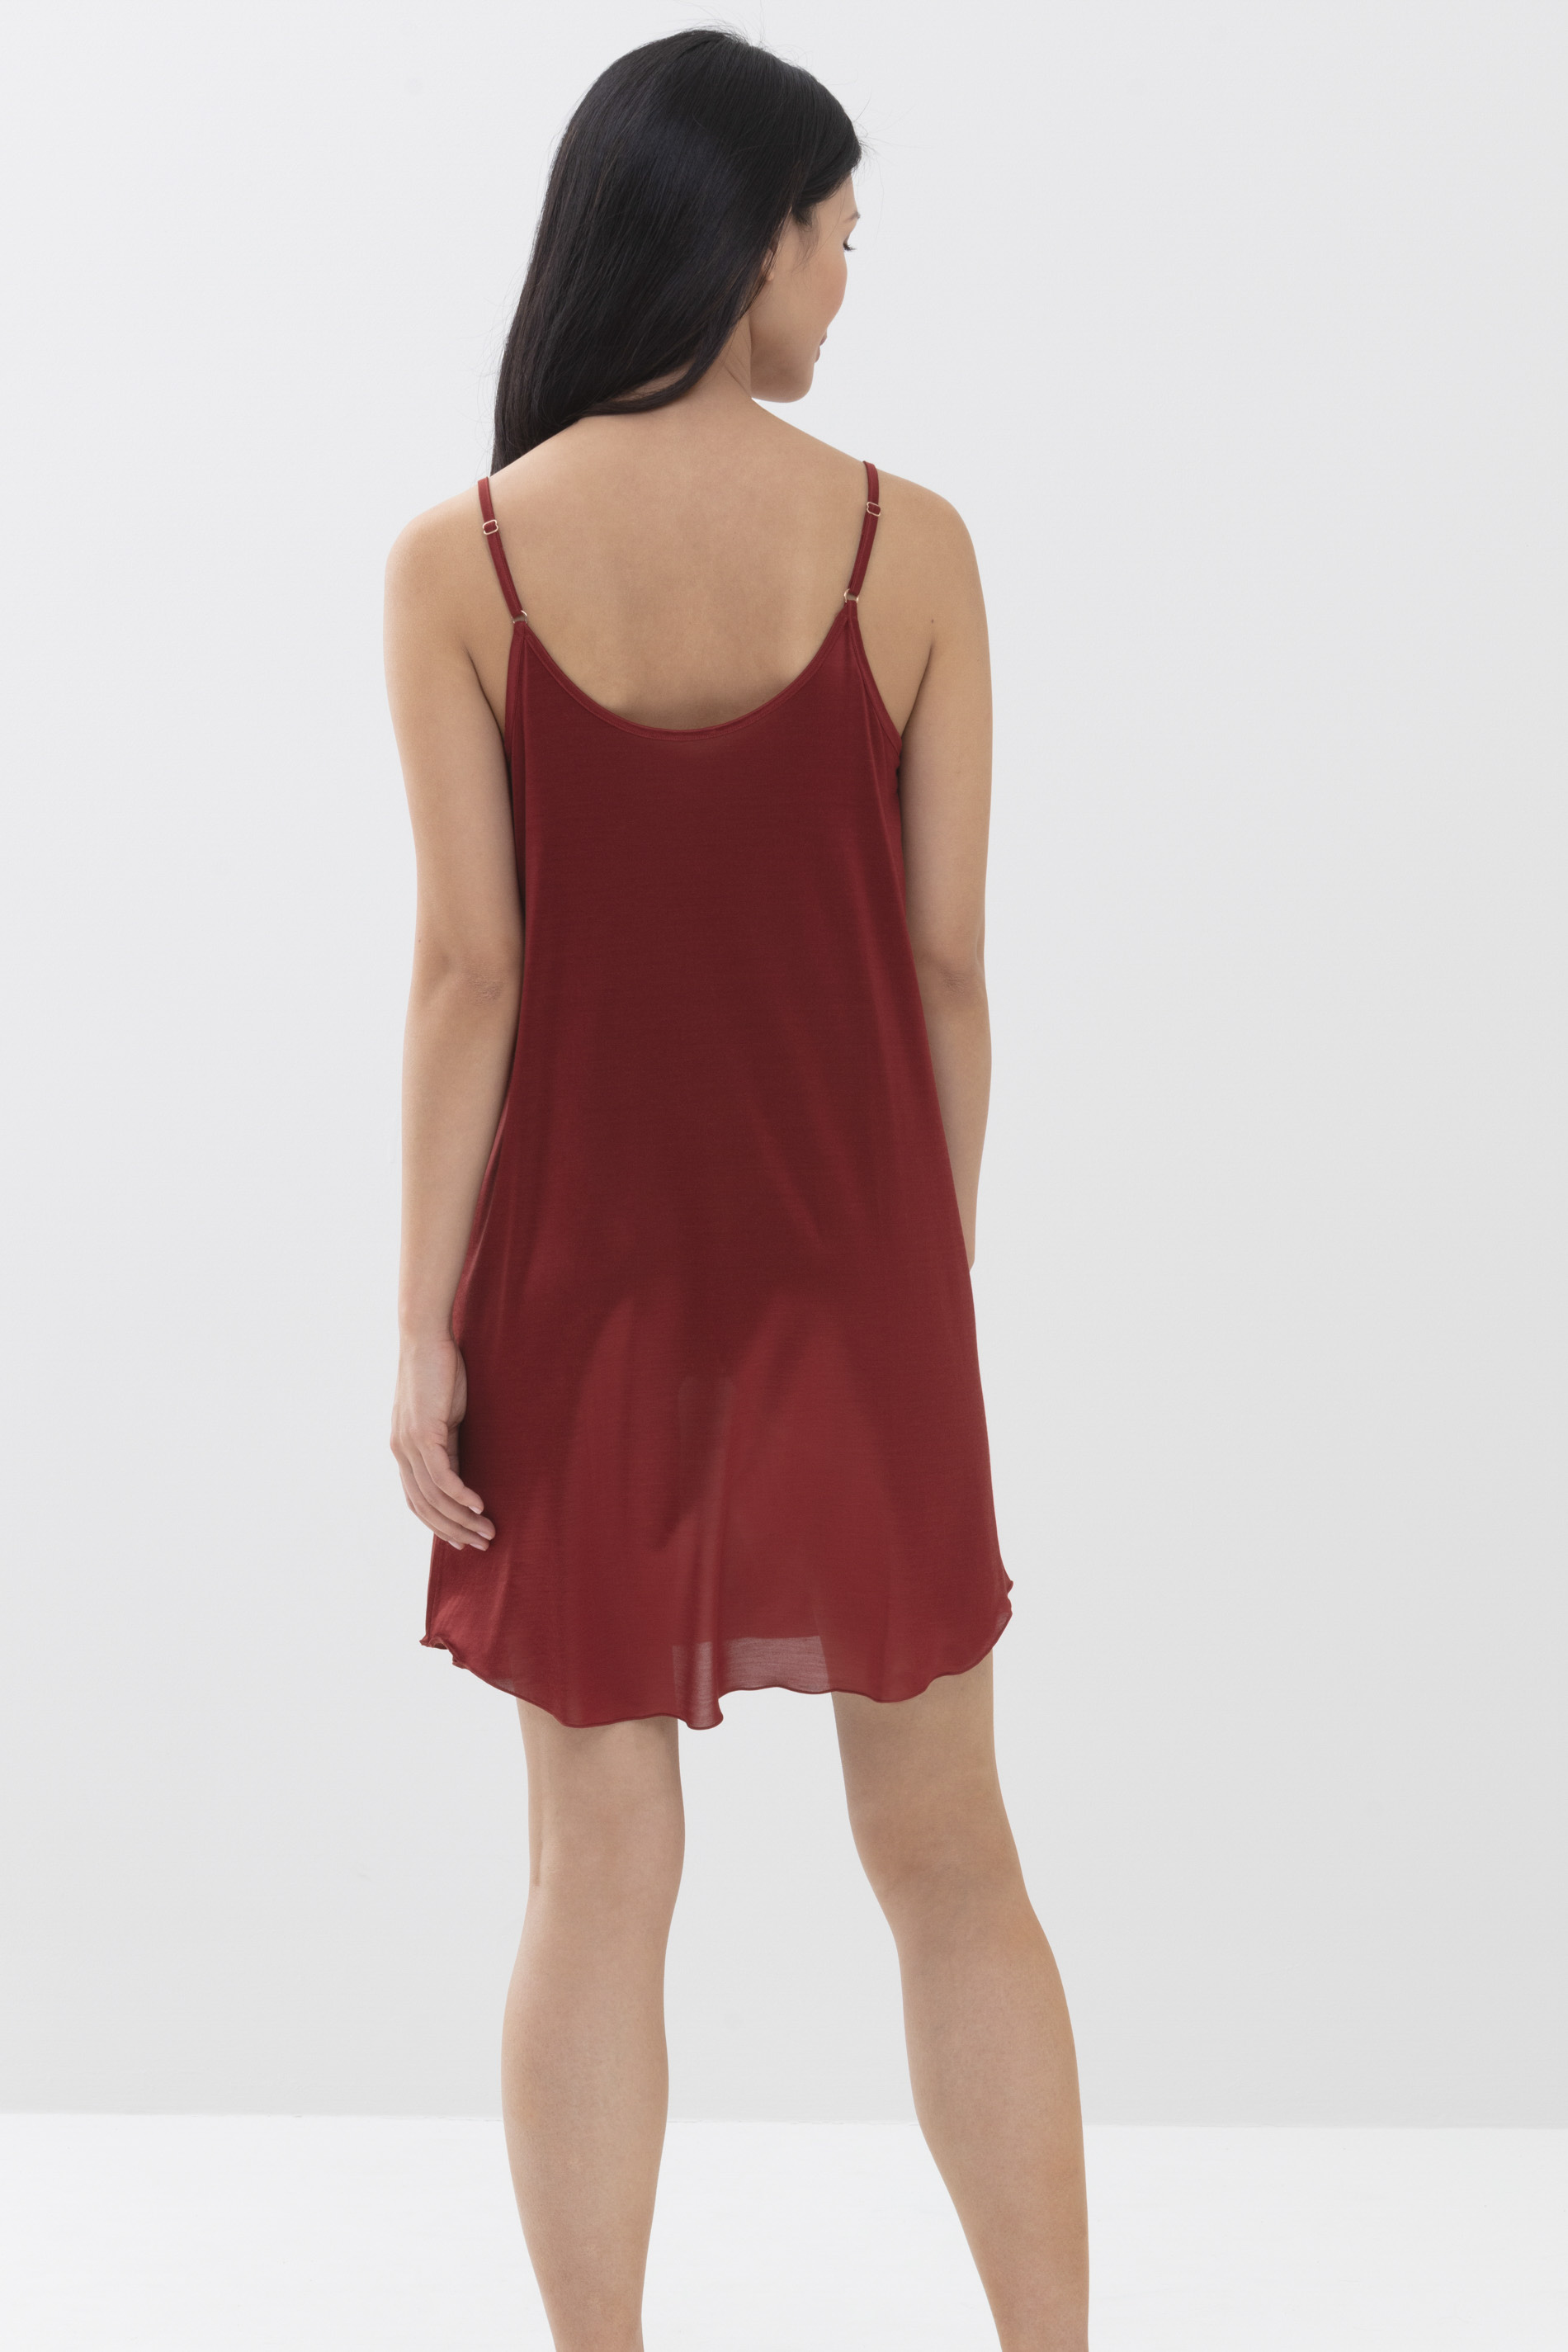 Negligee Red Pepper Serie Coco Rear View | mey®